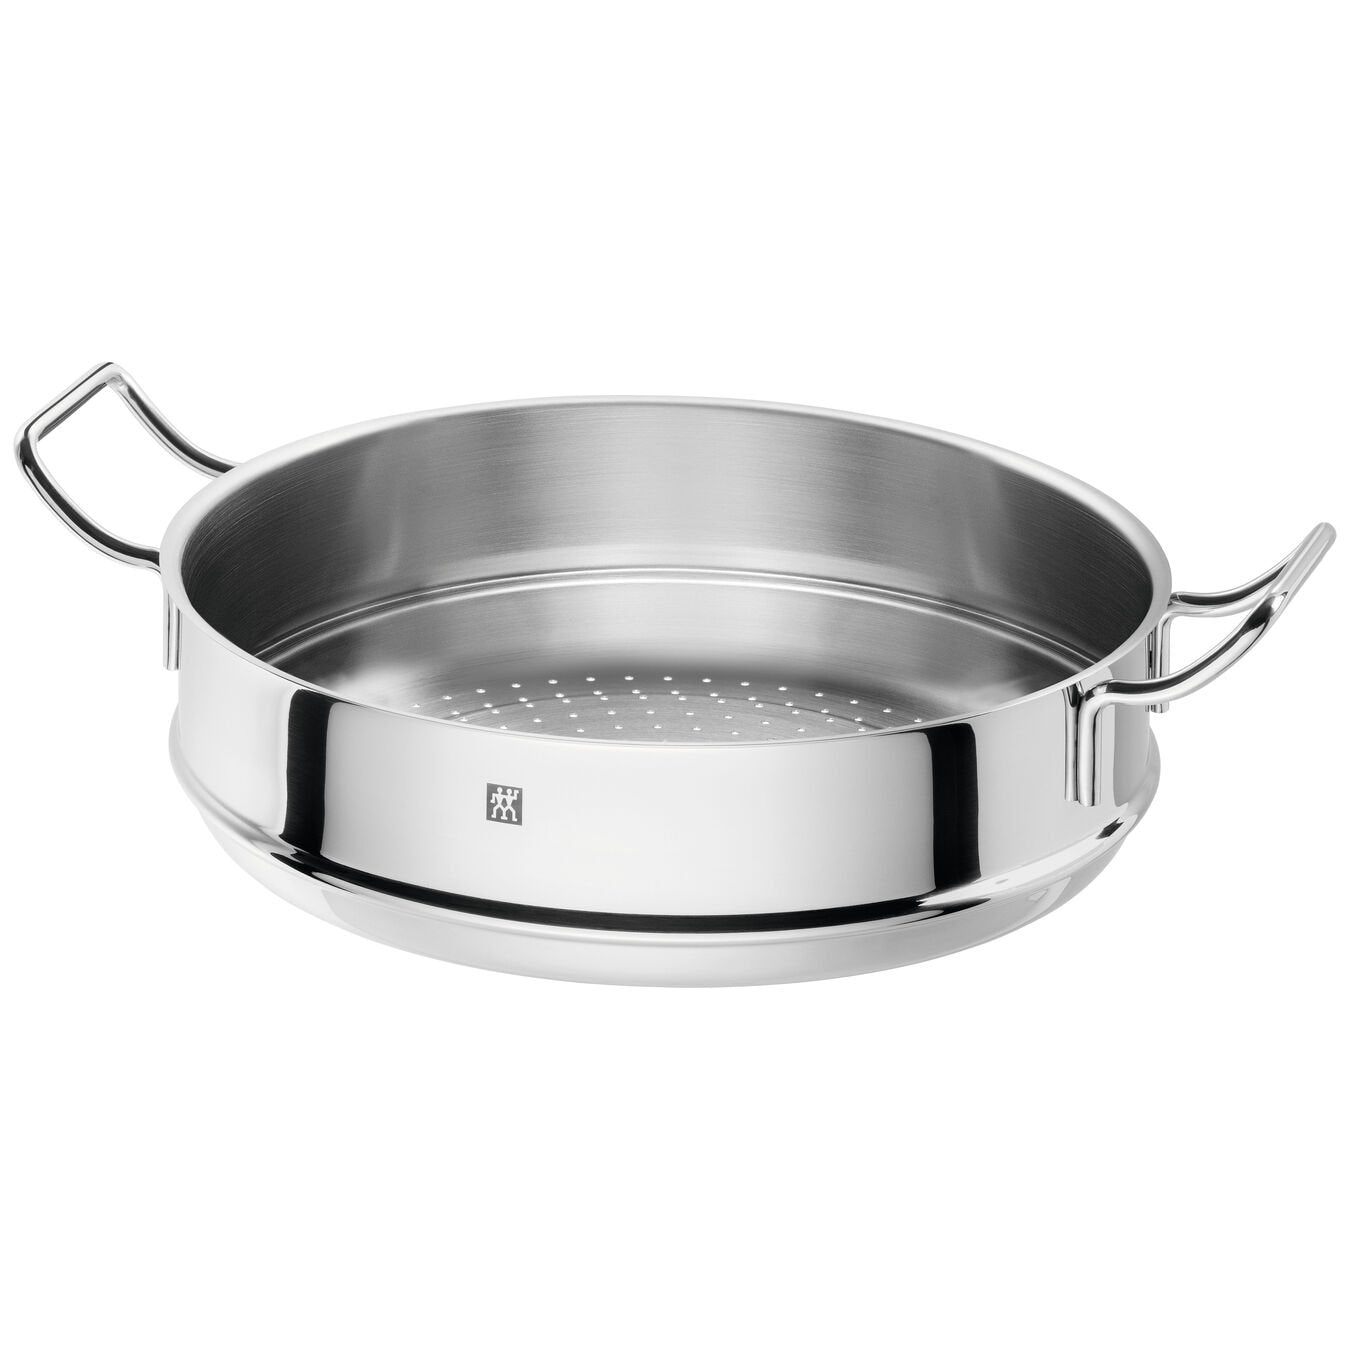 3 Piece Stainless Steel Wok with Steamer and Lid 12.5" / 32cm